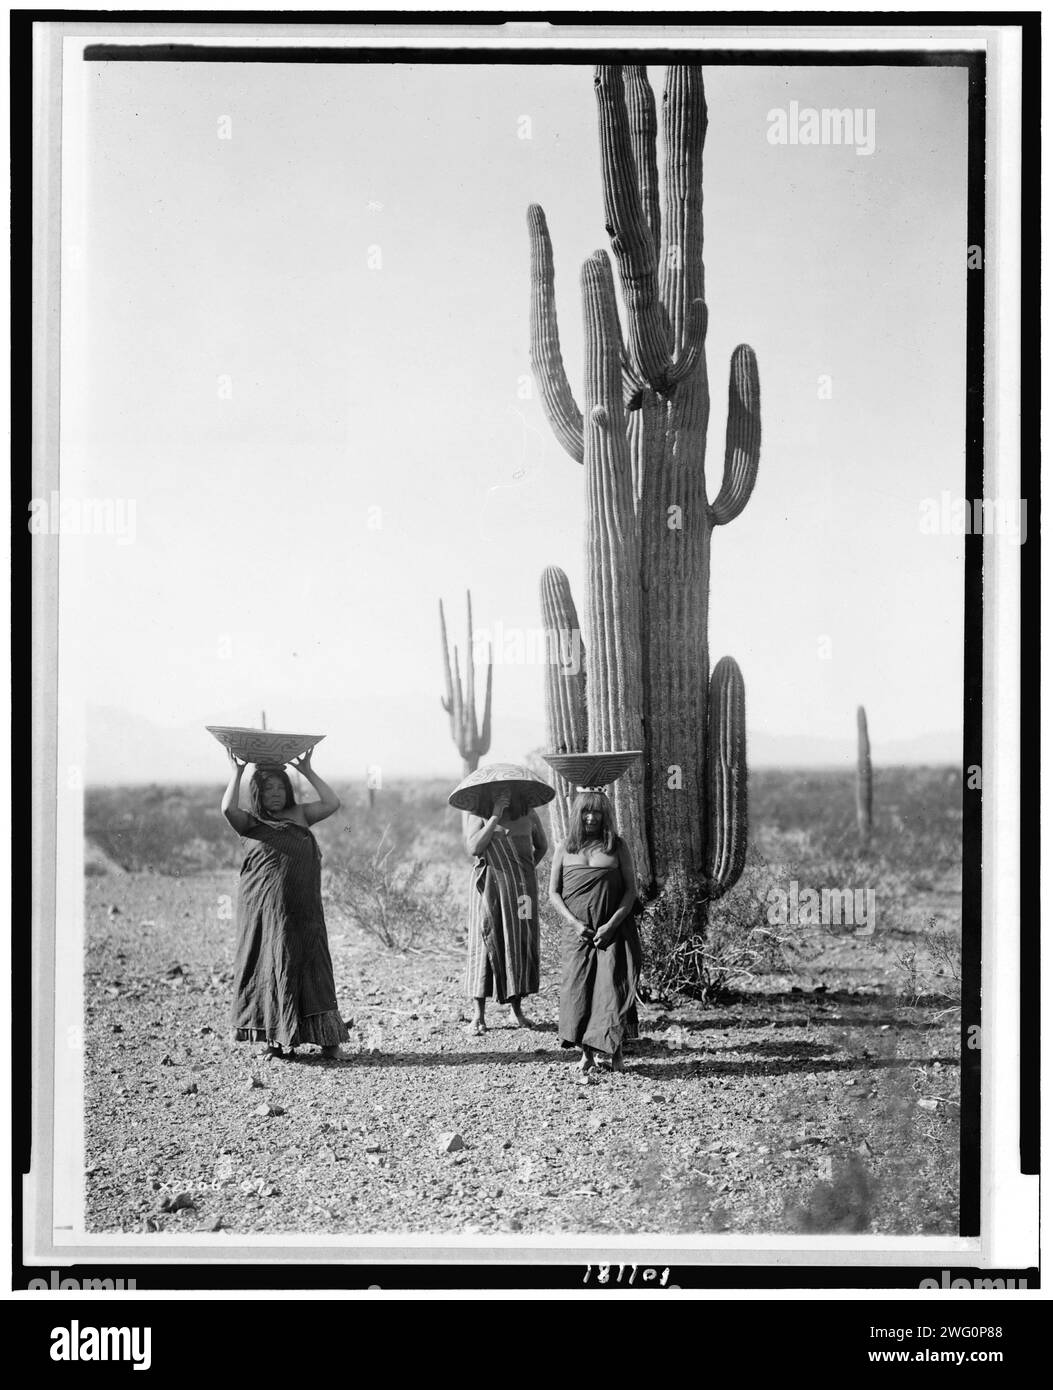 Maricopa women gathering fruit from Saguaro cacti, 1907, c1907. Three Maricopa women with baskets on their heads, standing by Saguaro cacti. Stock Photo